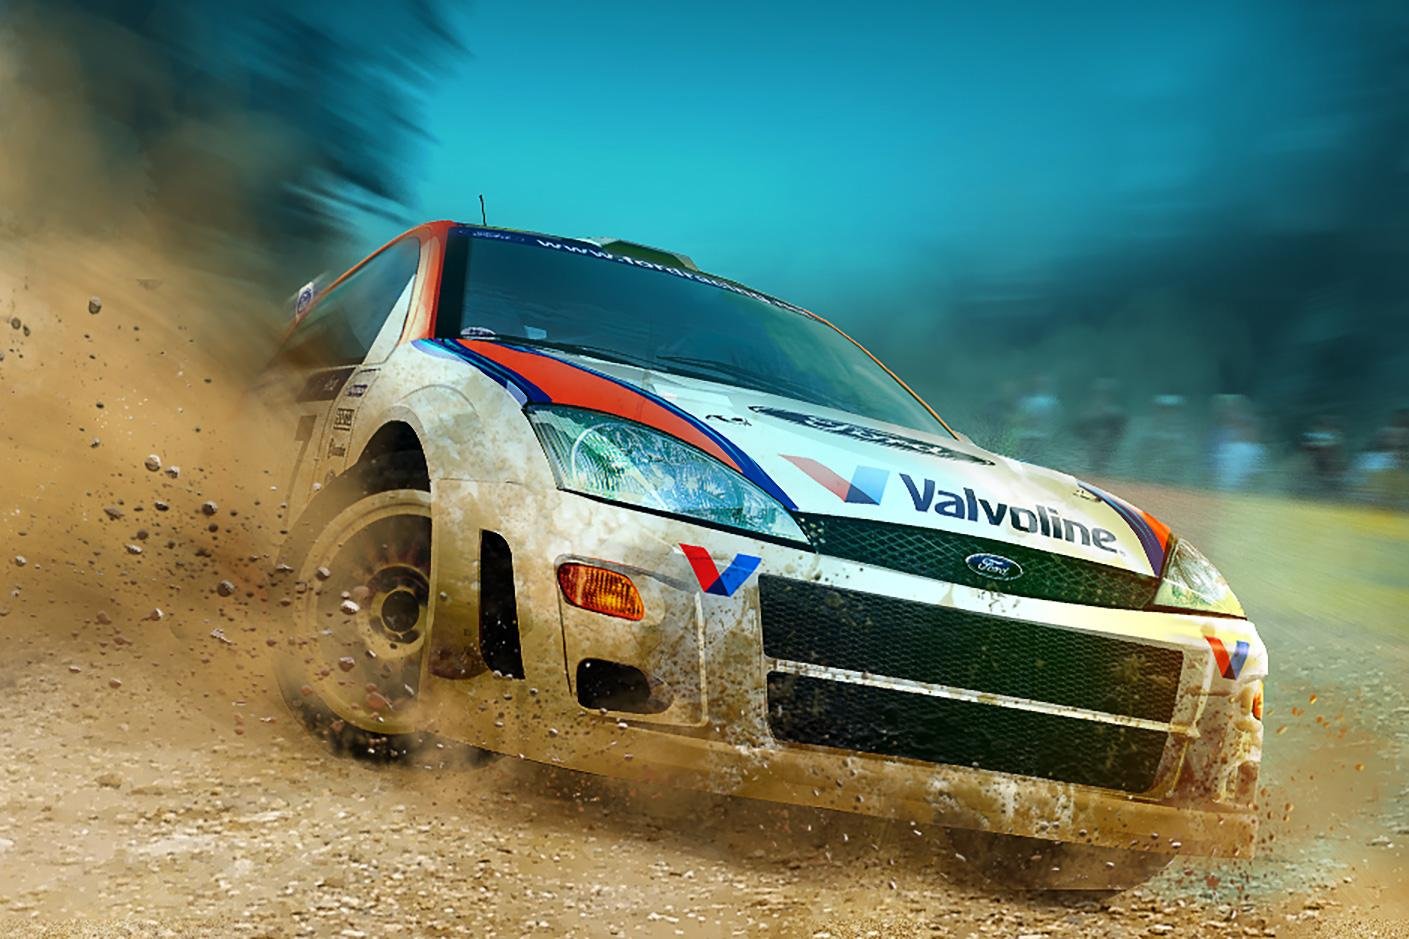 dirt 4 game download for android